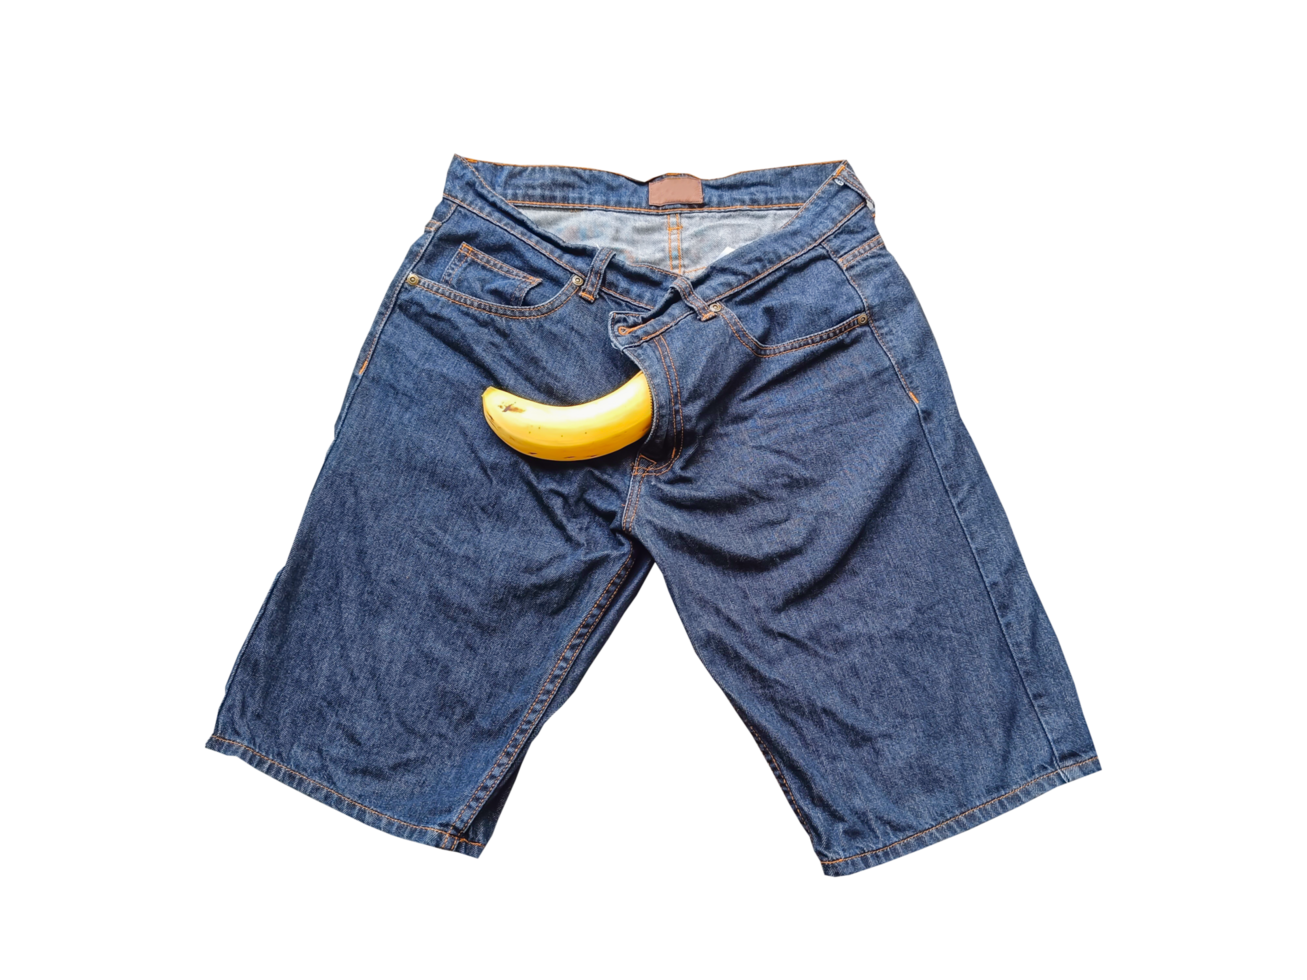 Big banana sticking out of mens jeans